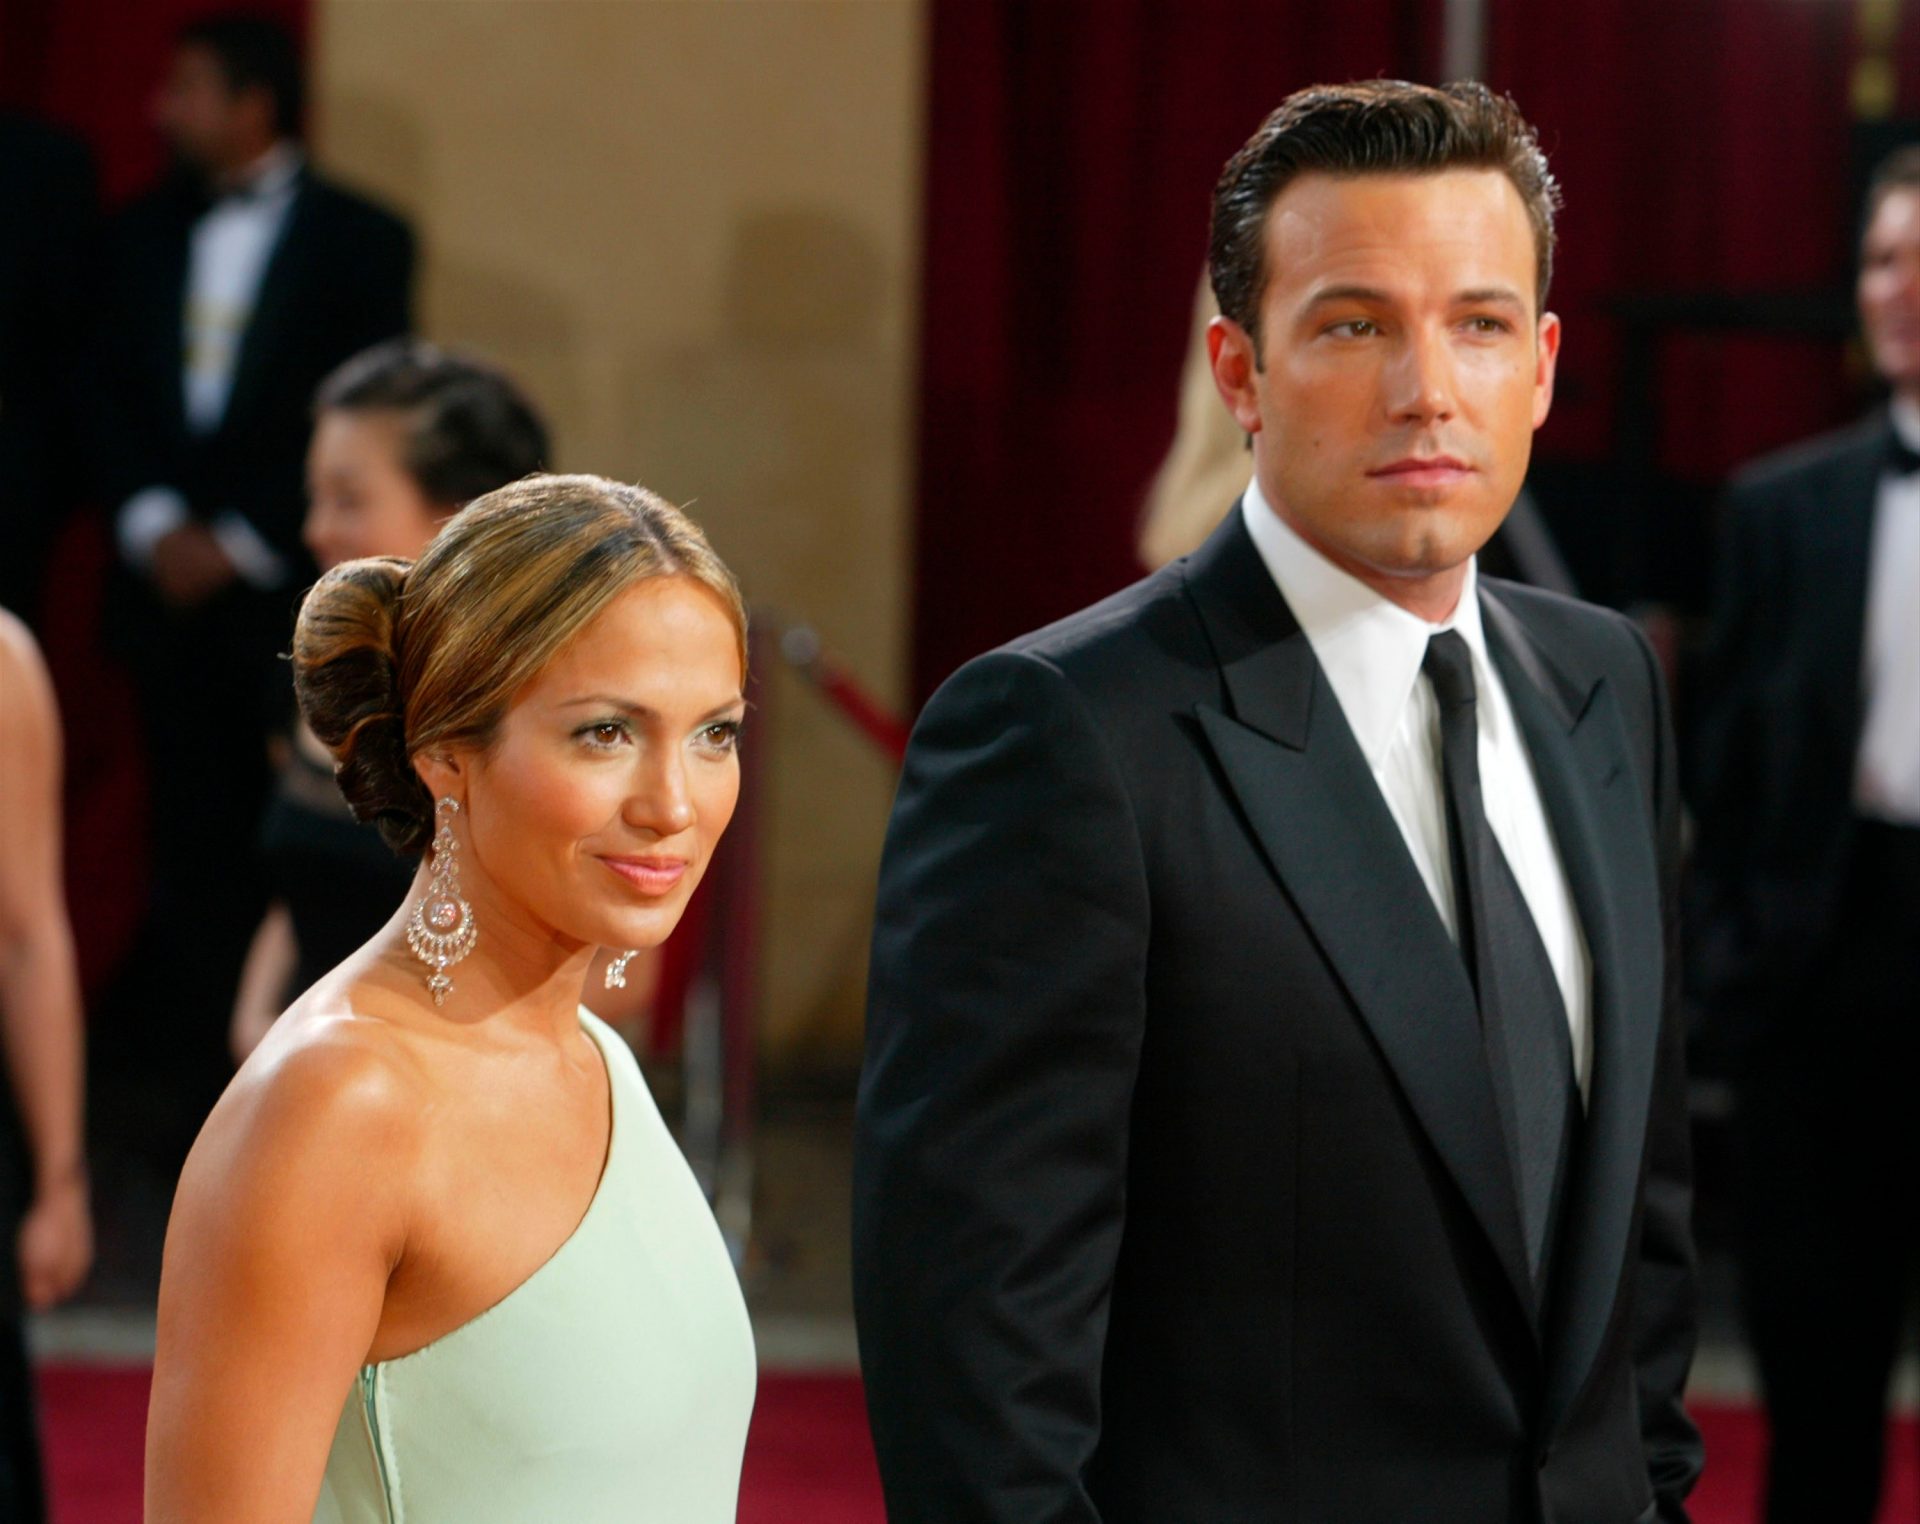 Ben Affleck Reportedly Reunited With J.Lo After Striking Out With Her Mom in Vegas